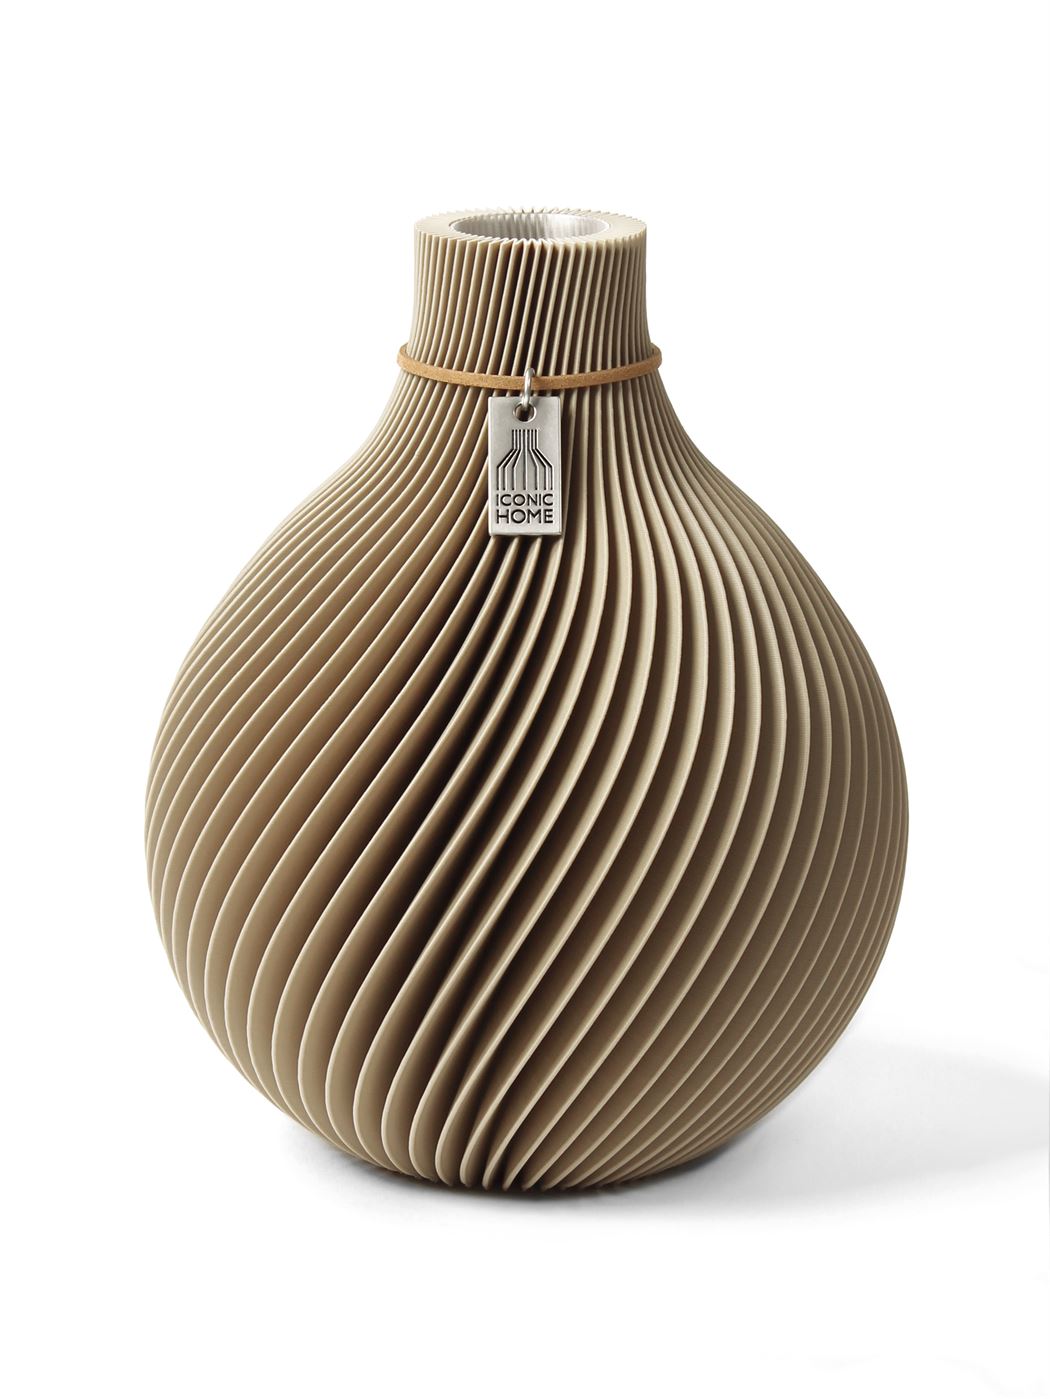 Vase Sphere holz Natural Oak Small ICONIC HOME